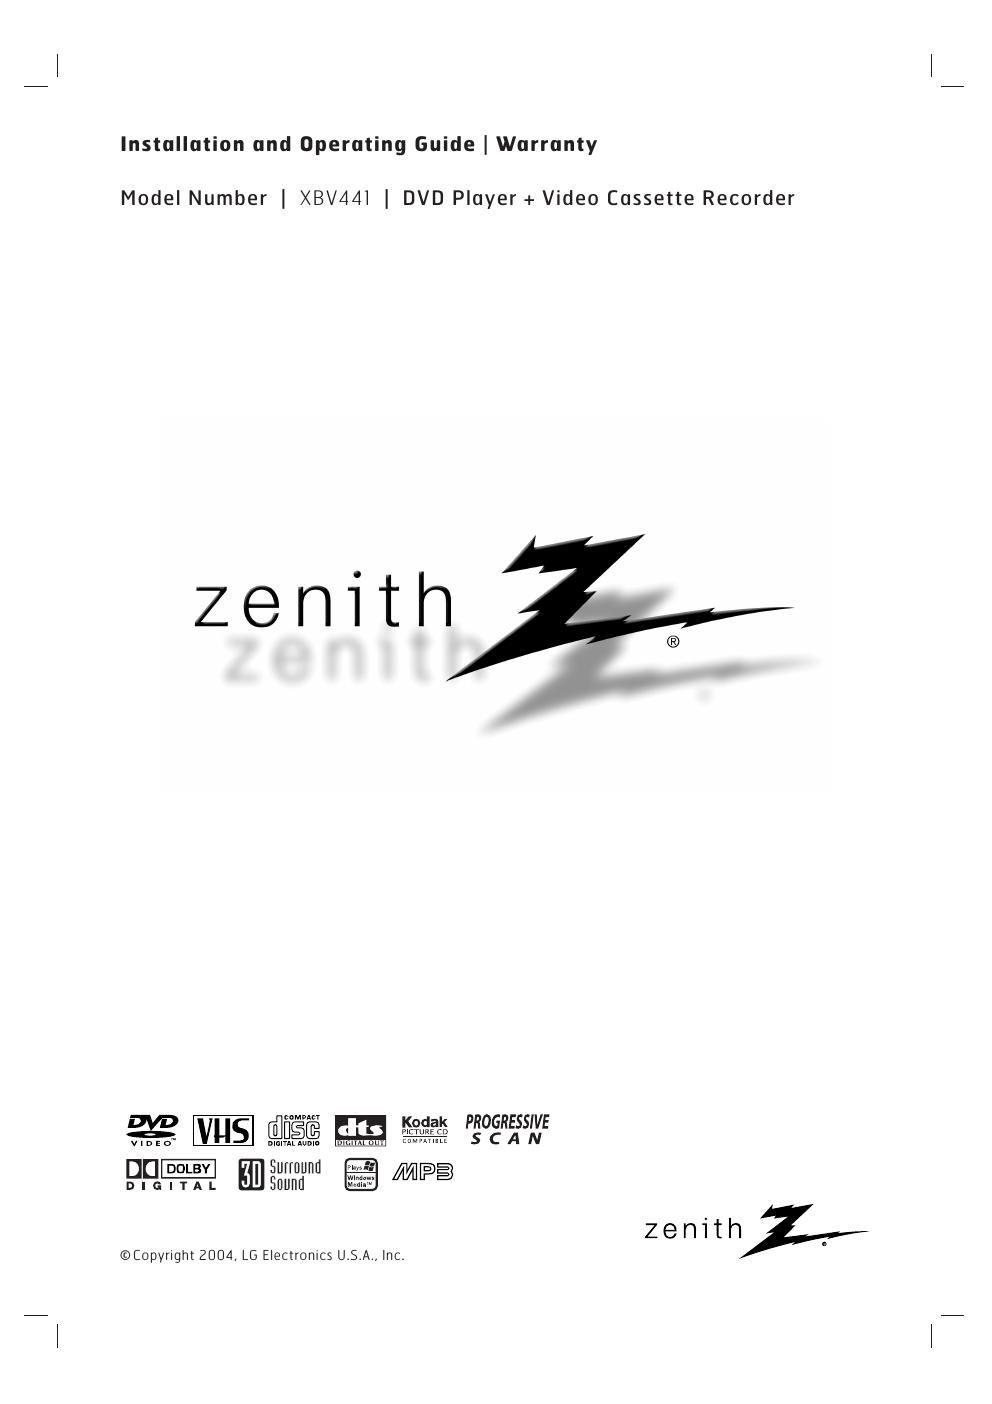 zenith xbv 441 owners manual